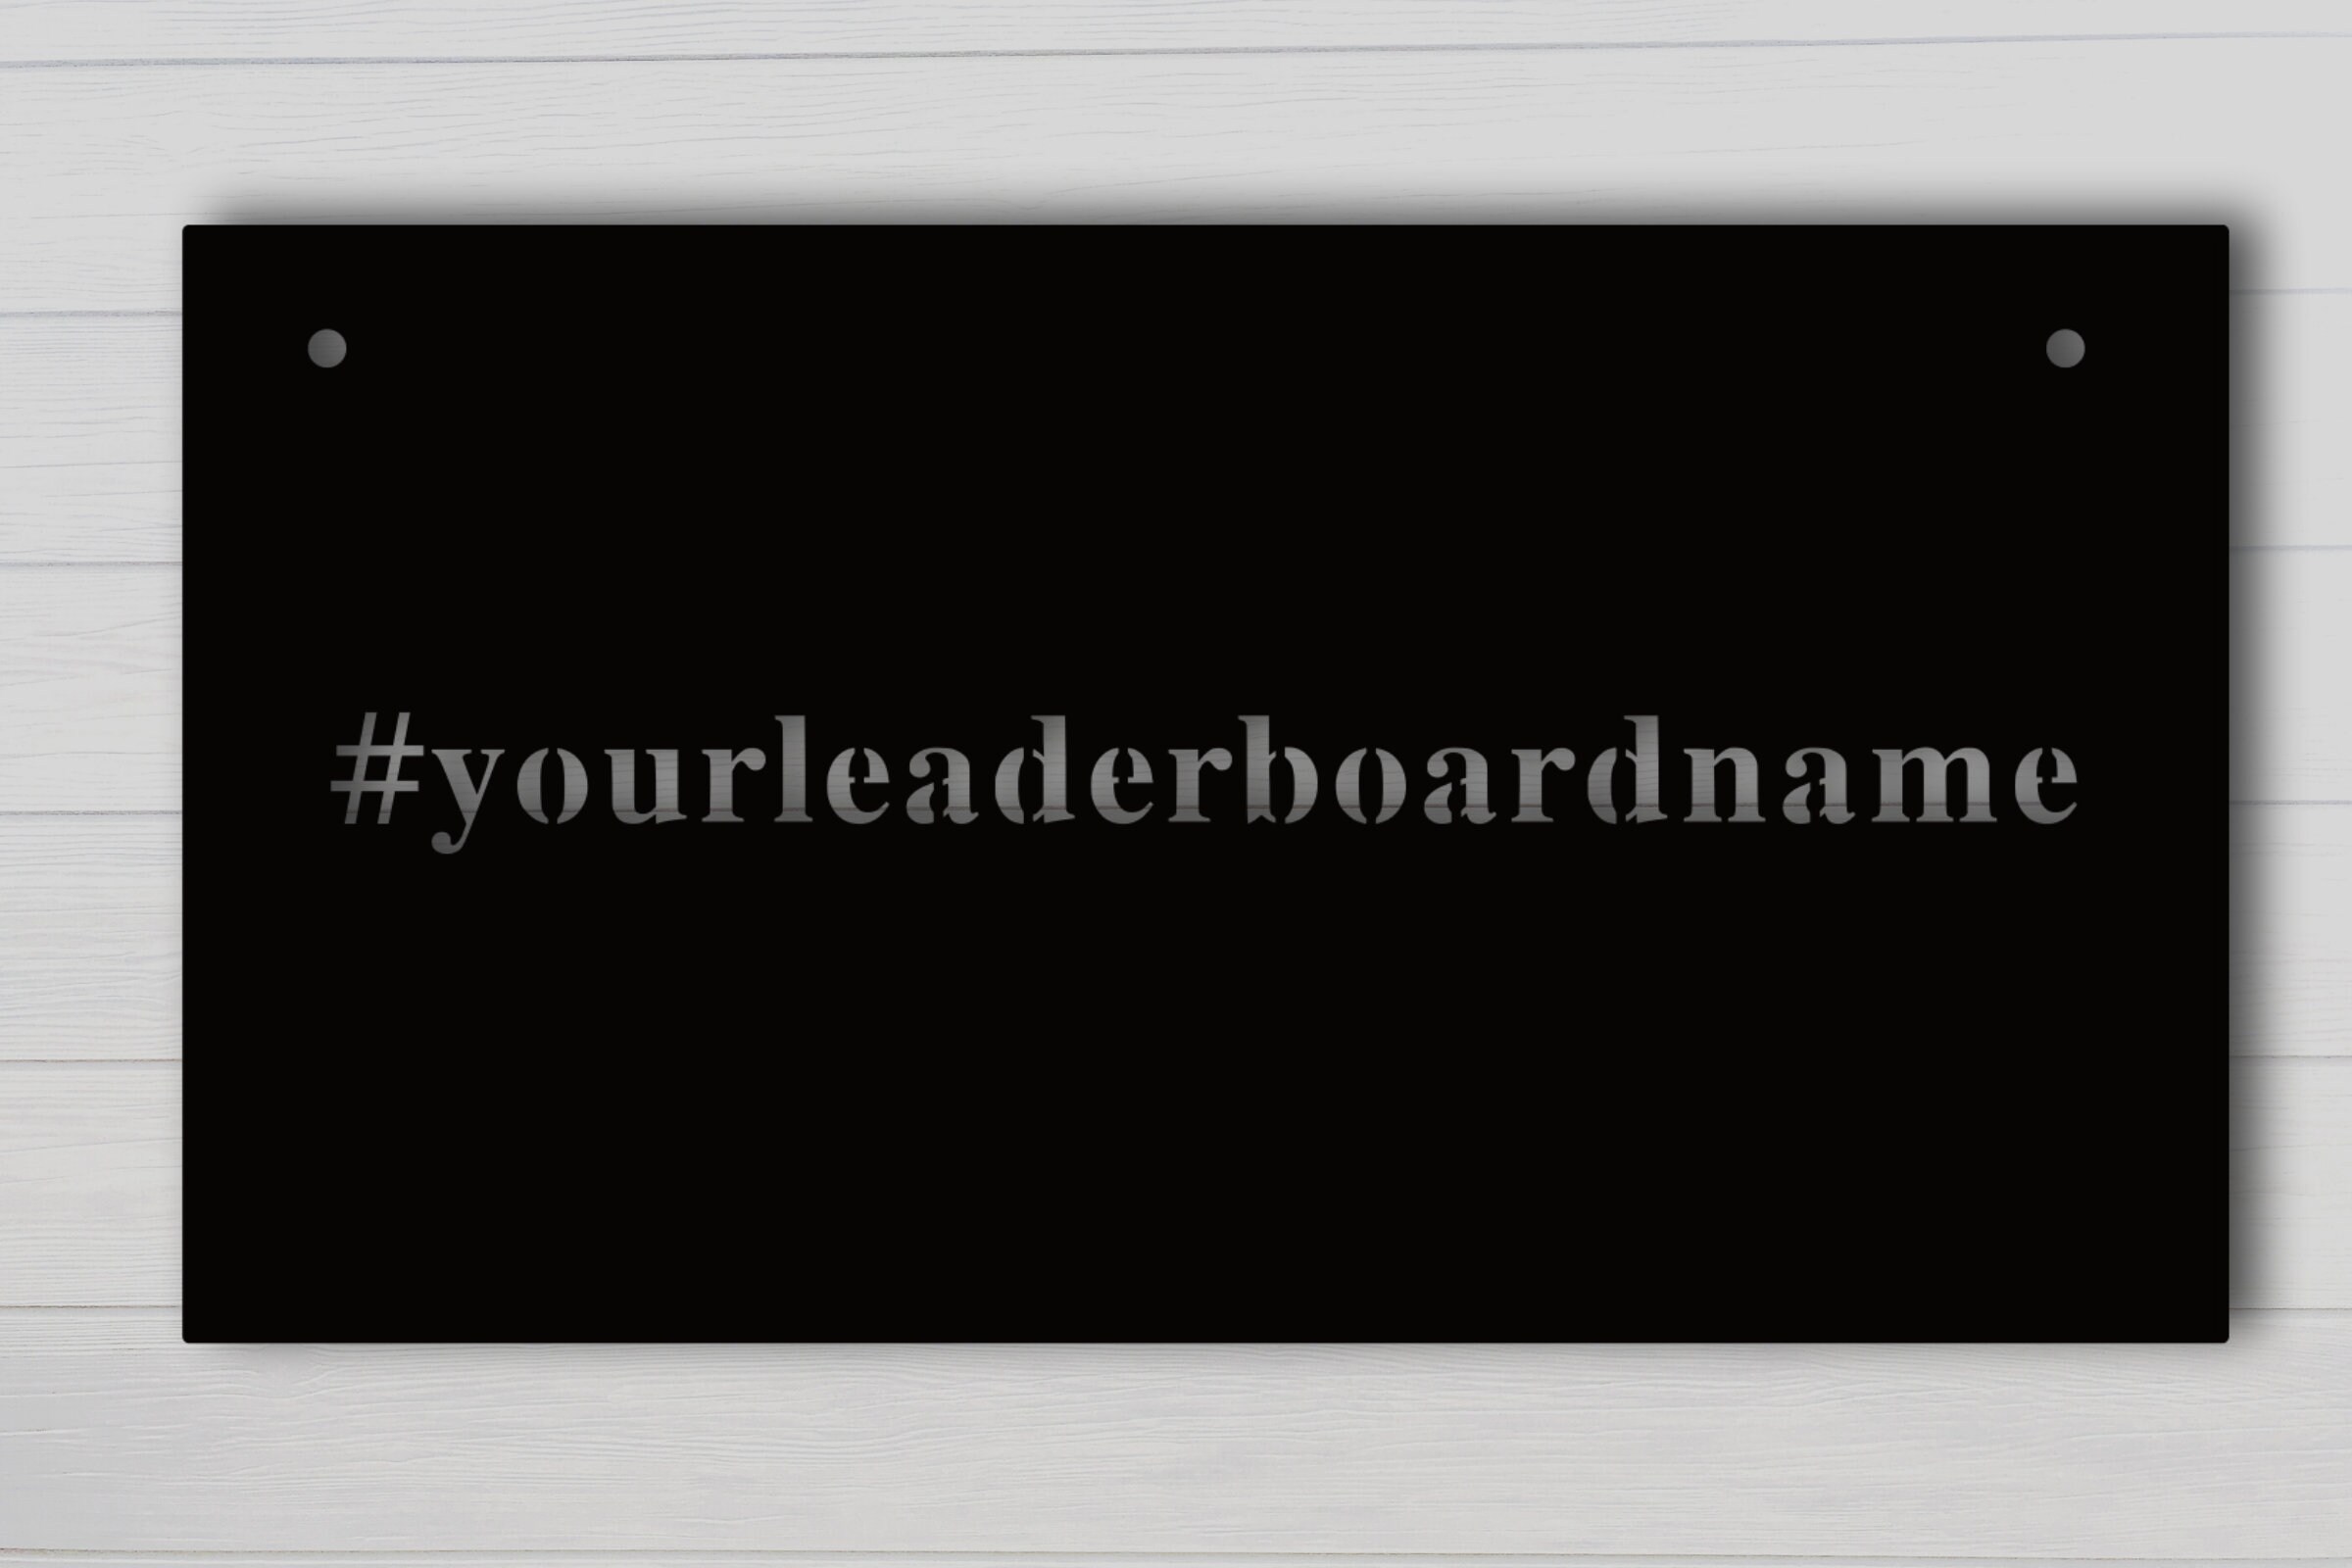 Personalized leaderboards get educators in the game : Announcements